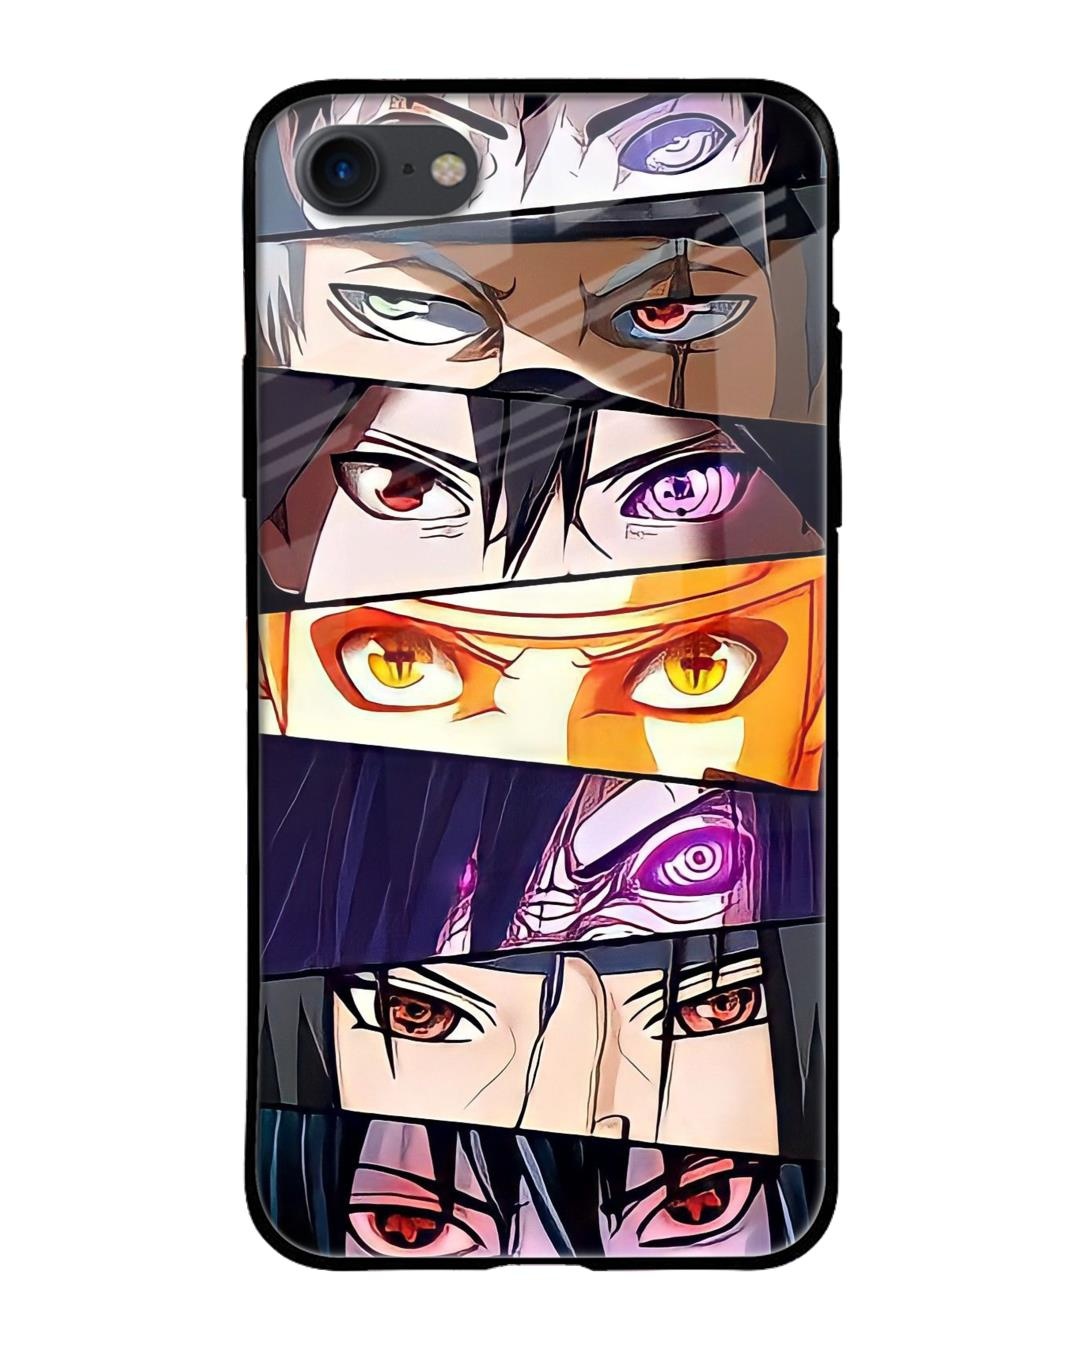 Buy Jowhep for iPhone SE 2022202078 Case Cover Cases Hard TPU Cartoon  Anime 3D Funny Fun Design Character Unique Shell for Girls Boys Friends Men   Three People for iPhone SE 2022202078